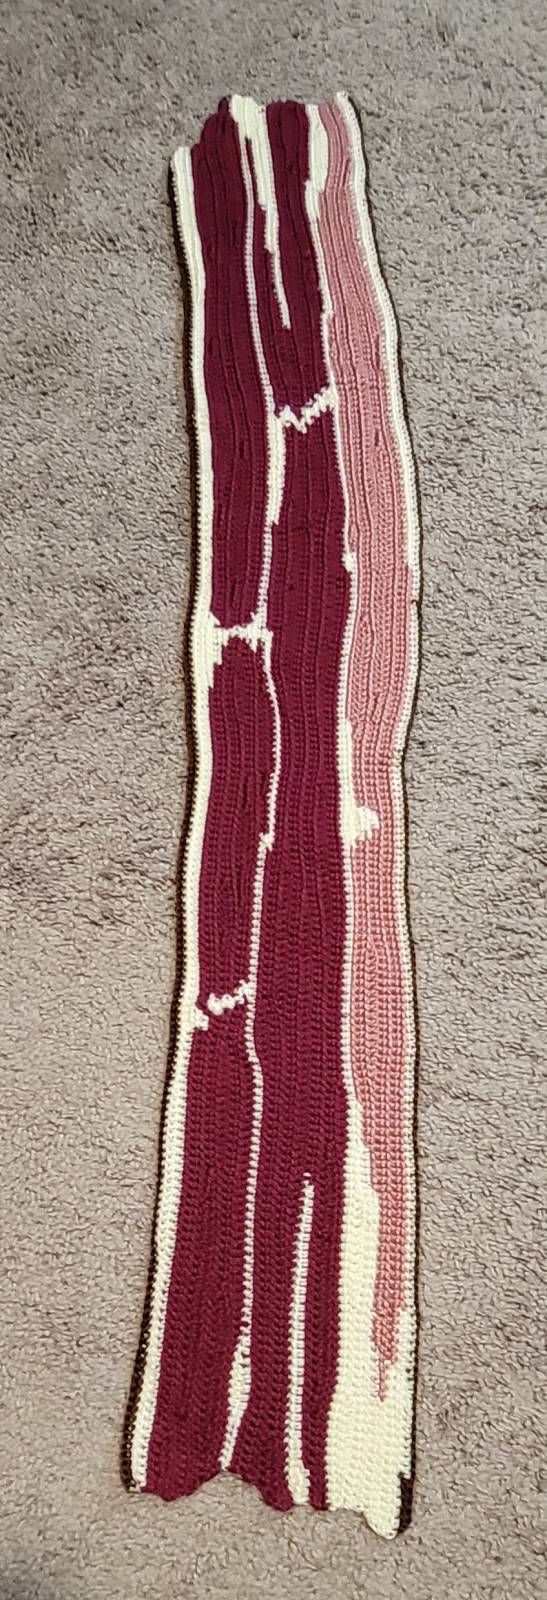 Streaky Bacon Pork Belly Scarf Crochet Pattern Review byTammy Neufeld for Cottontail and Whiskers